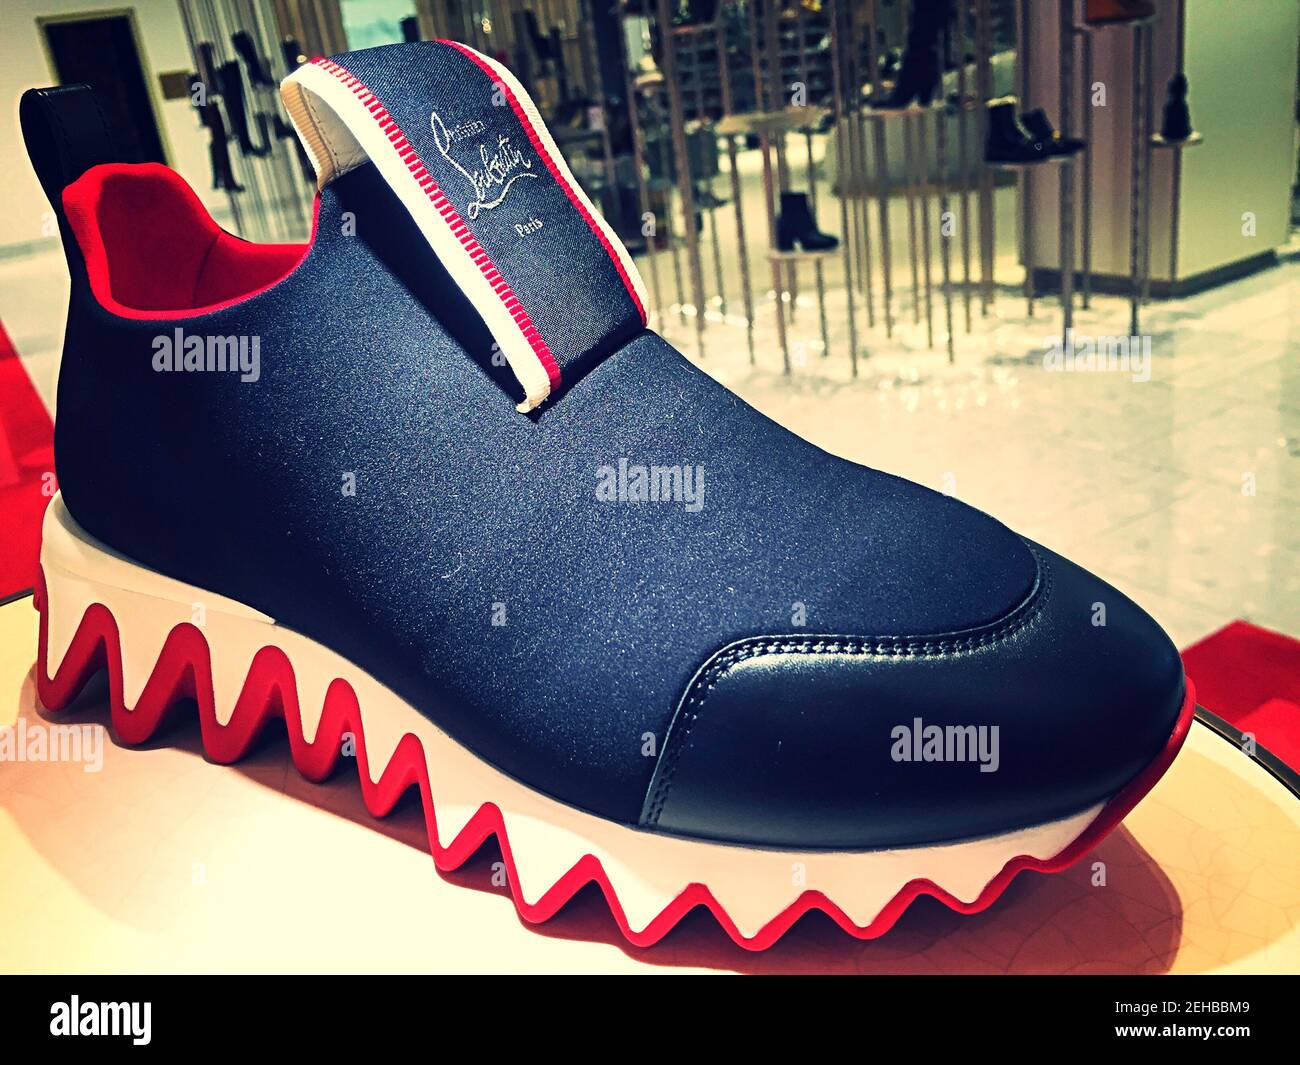 Louboutin High Resolution Stock Photography and - Alamy